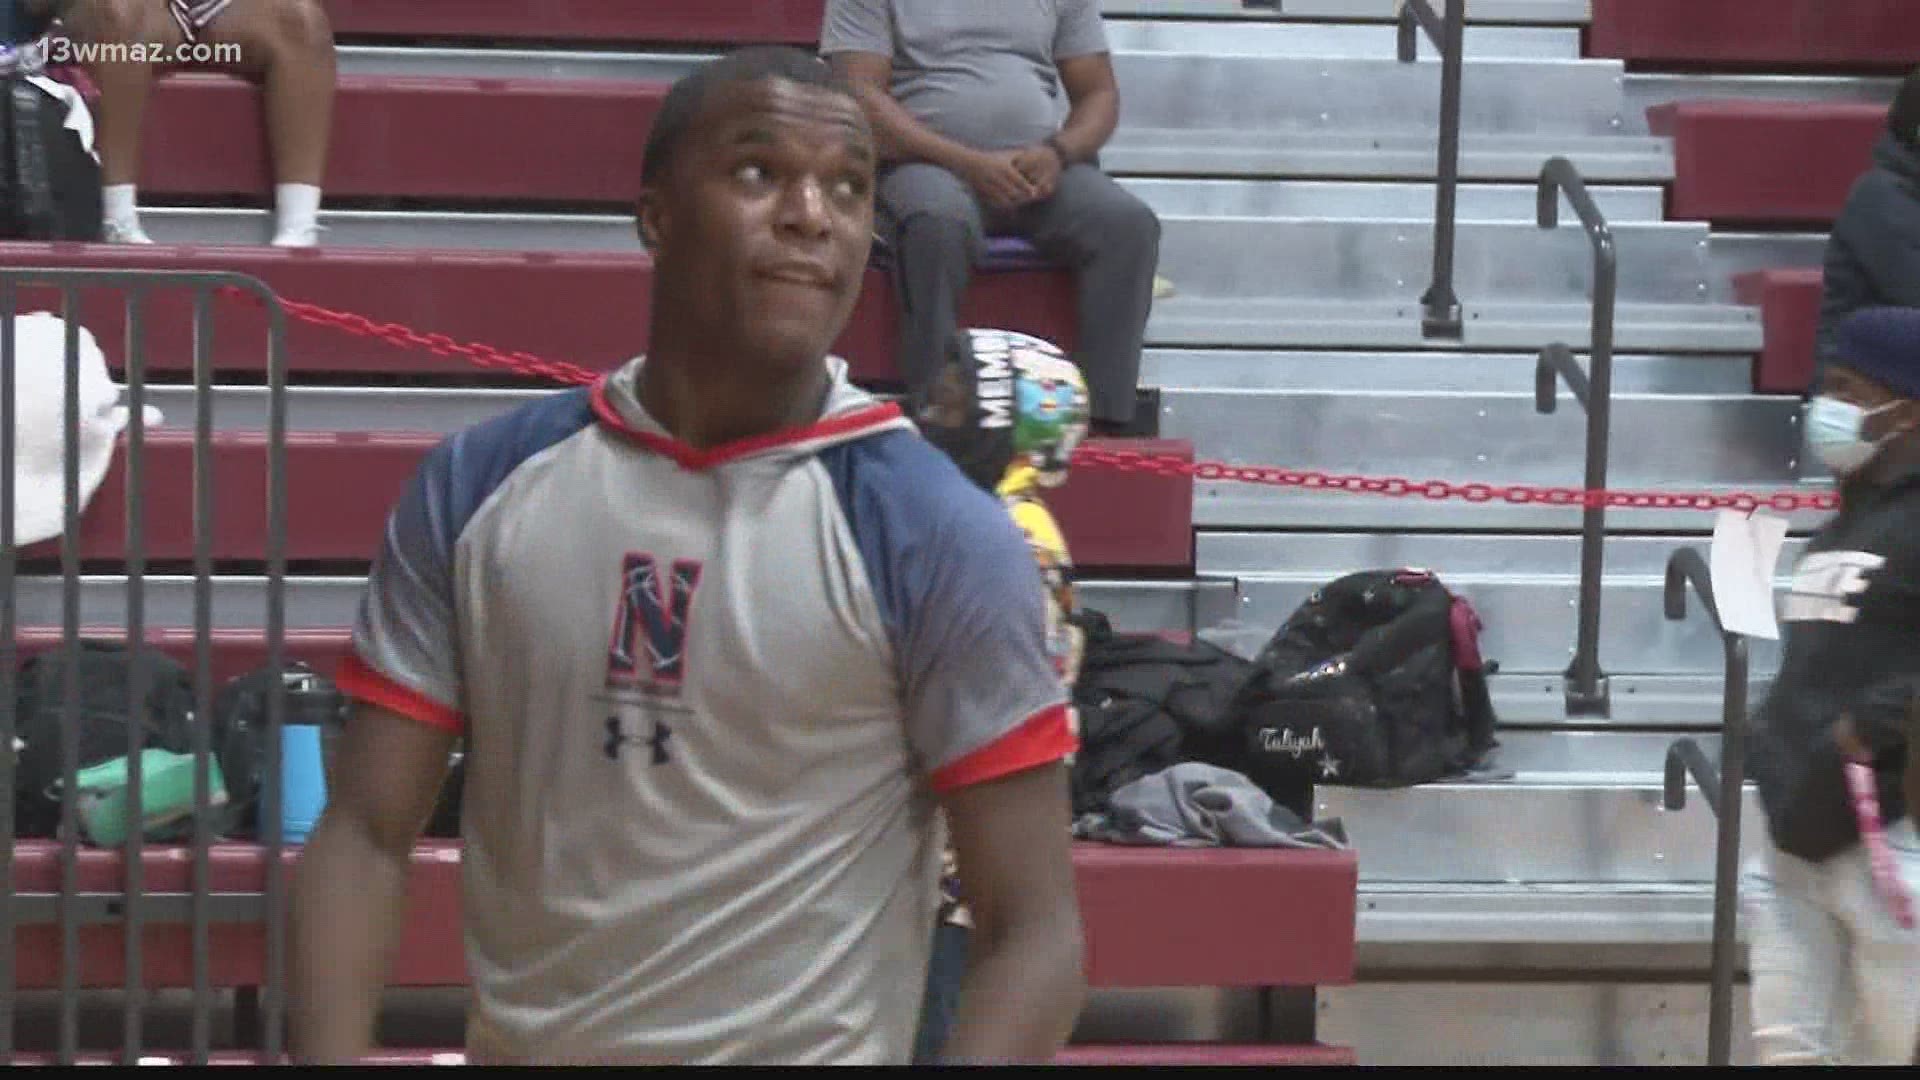 This week's athlete is looking to prove himself in his senior year as a Northside Eagle and he's letting his play do the talking for him.